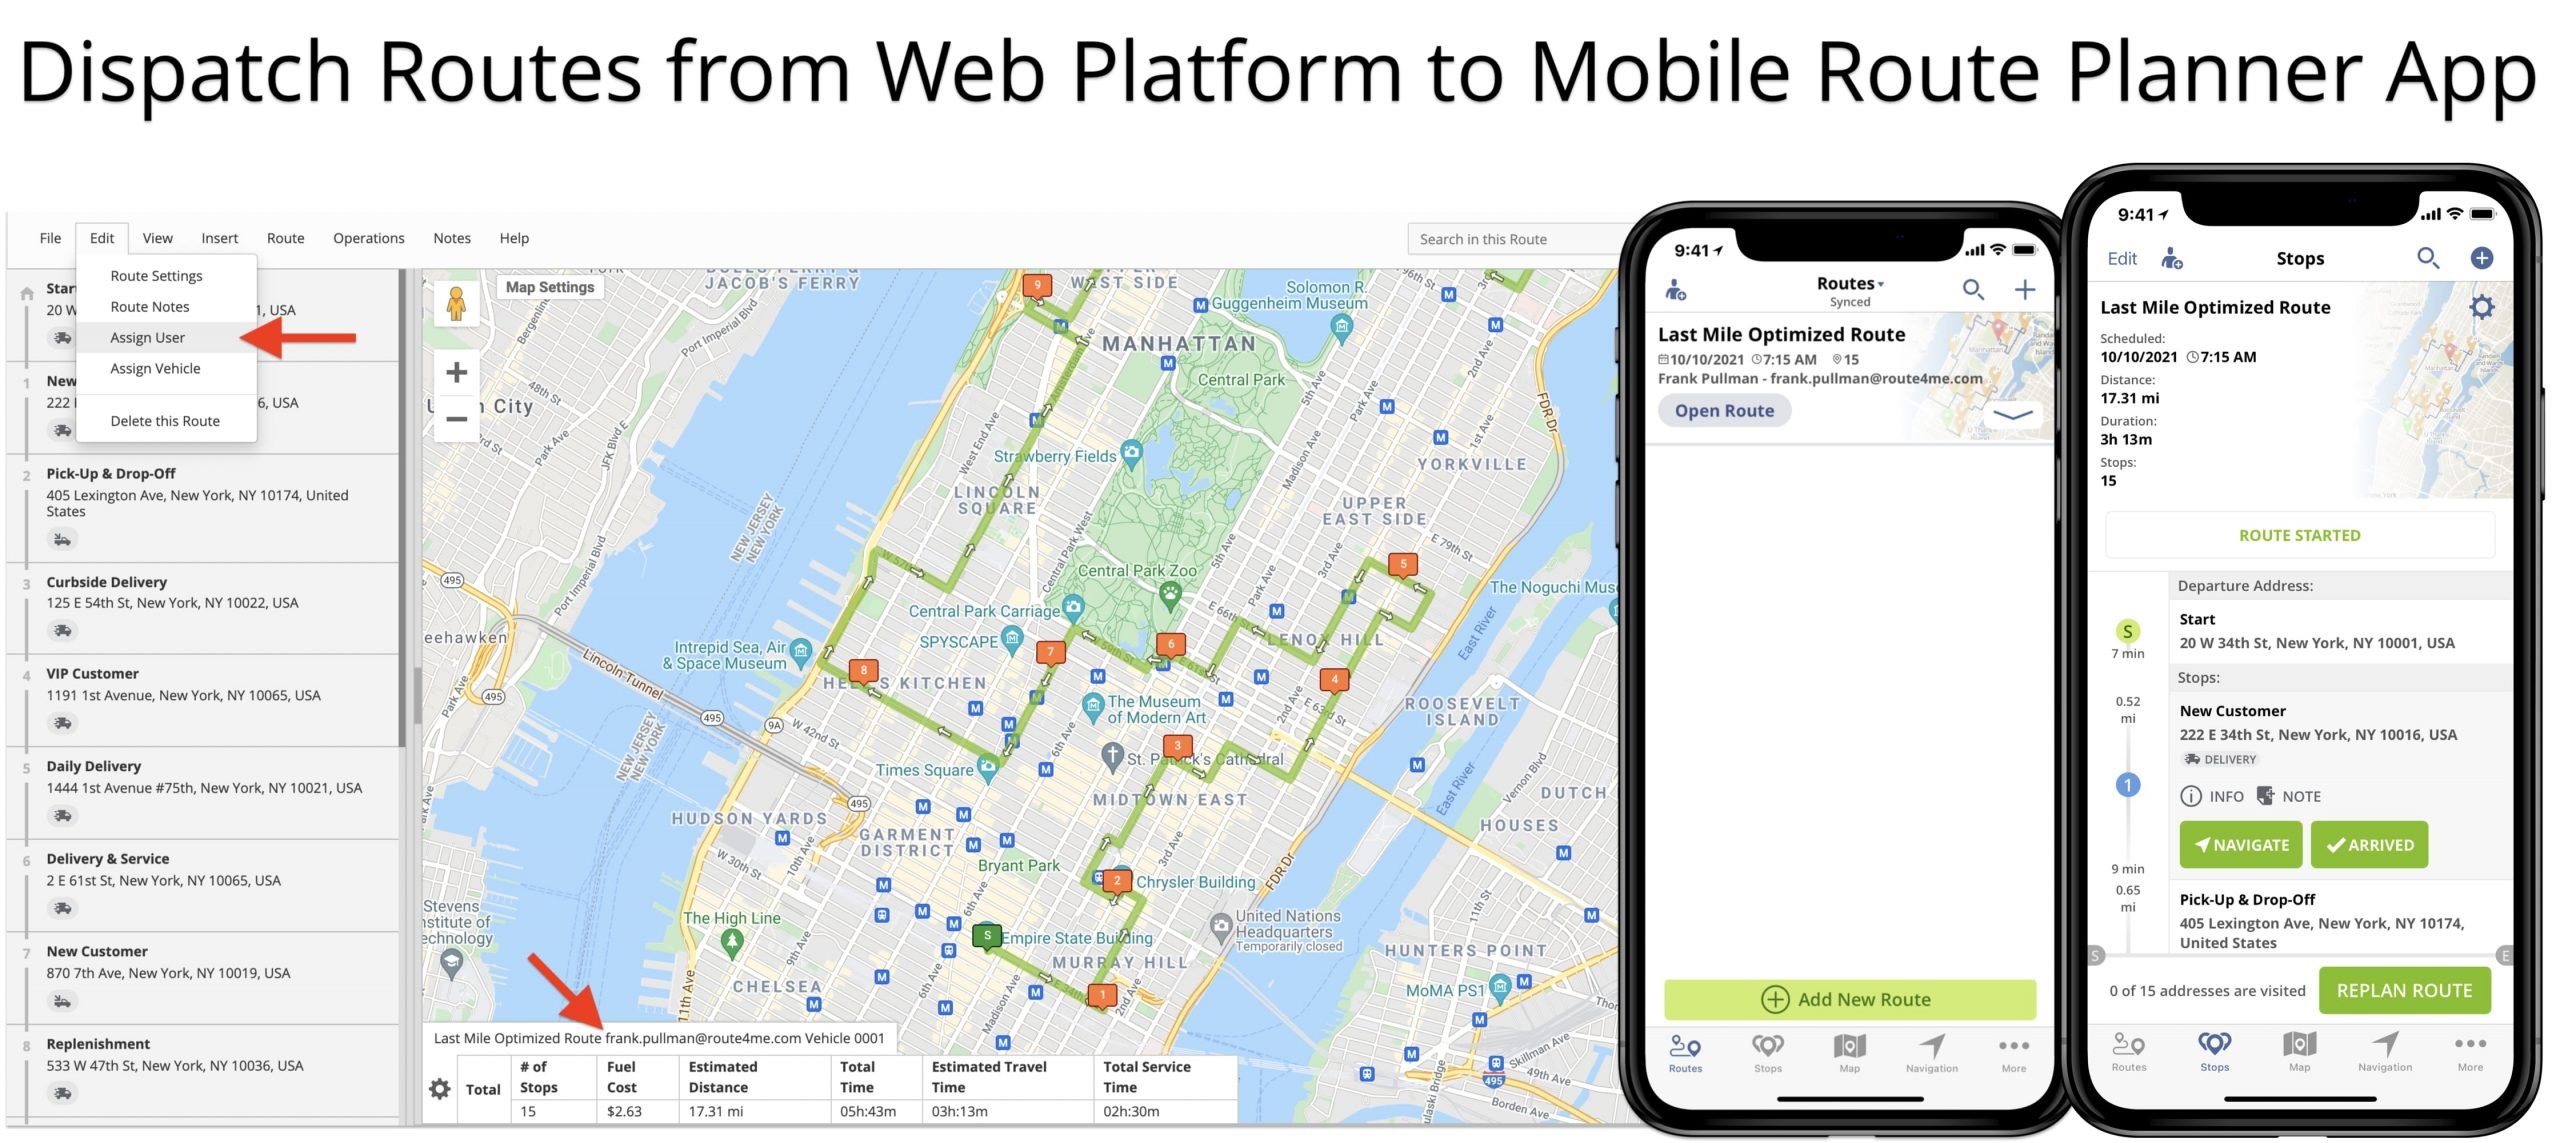 Dispatch routes from the Web route planning platform to the mobile route planner app.